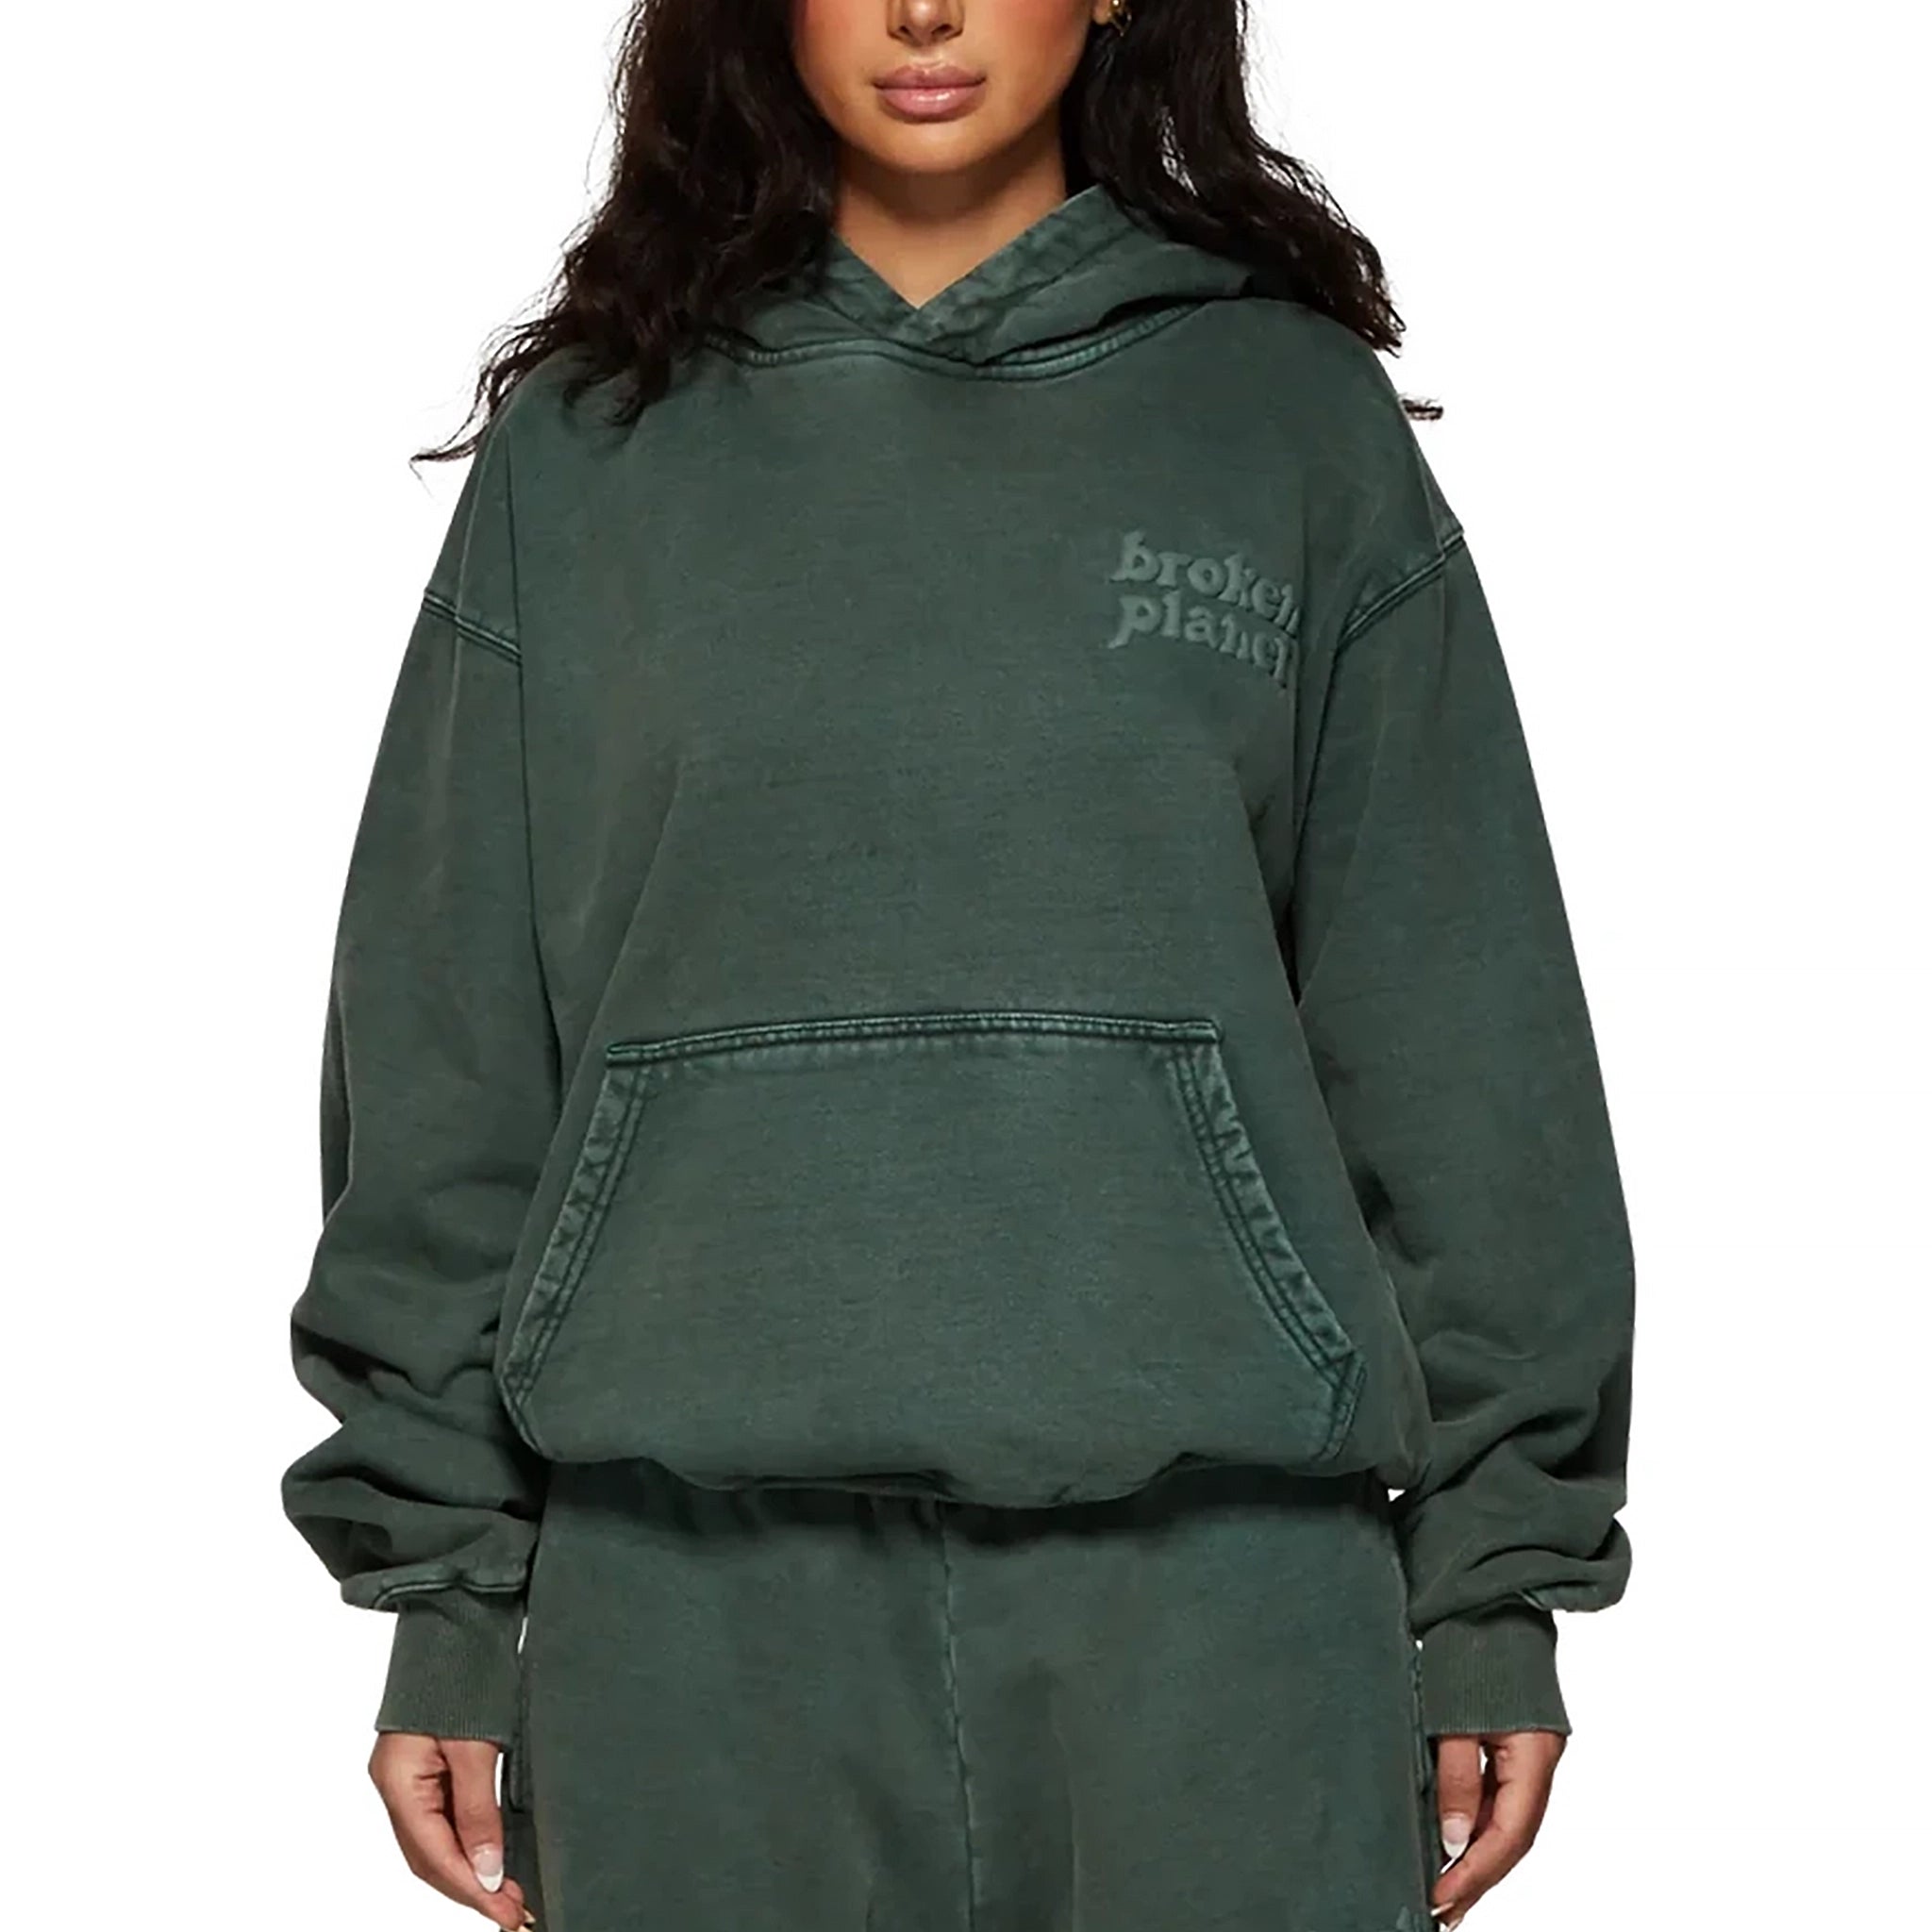 Model view of Broken Planet Basics Washed Emerald Hoodie